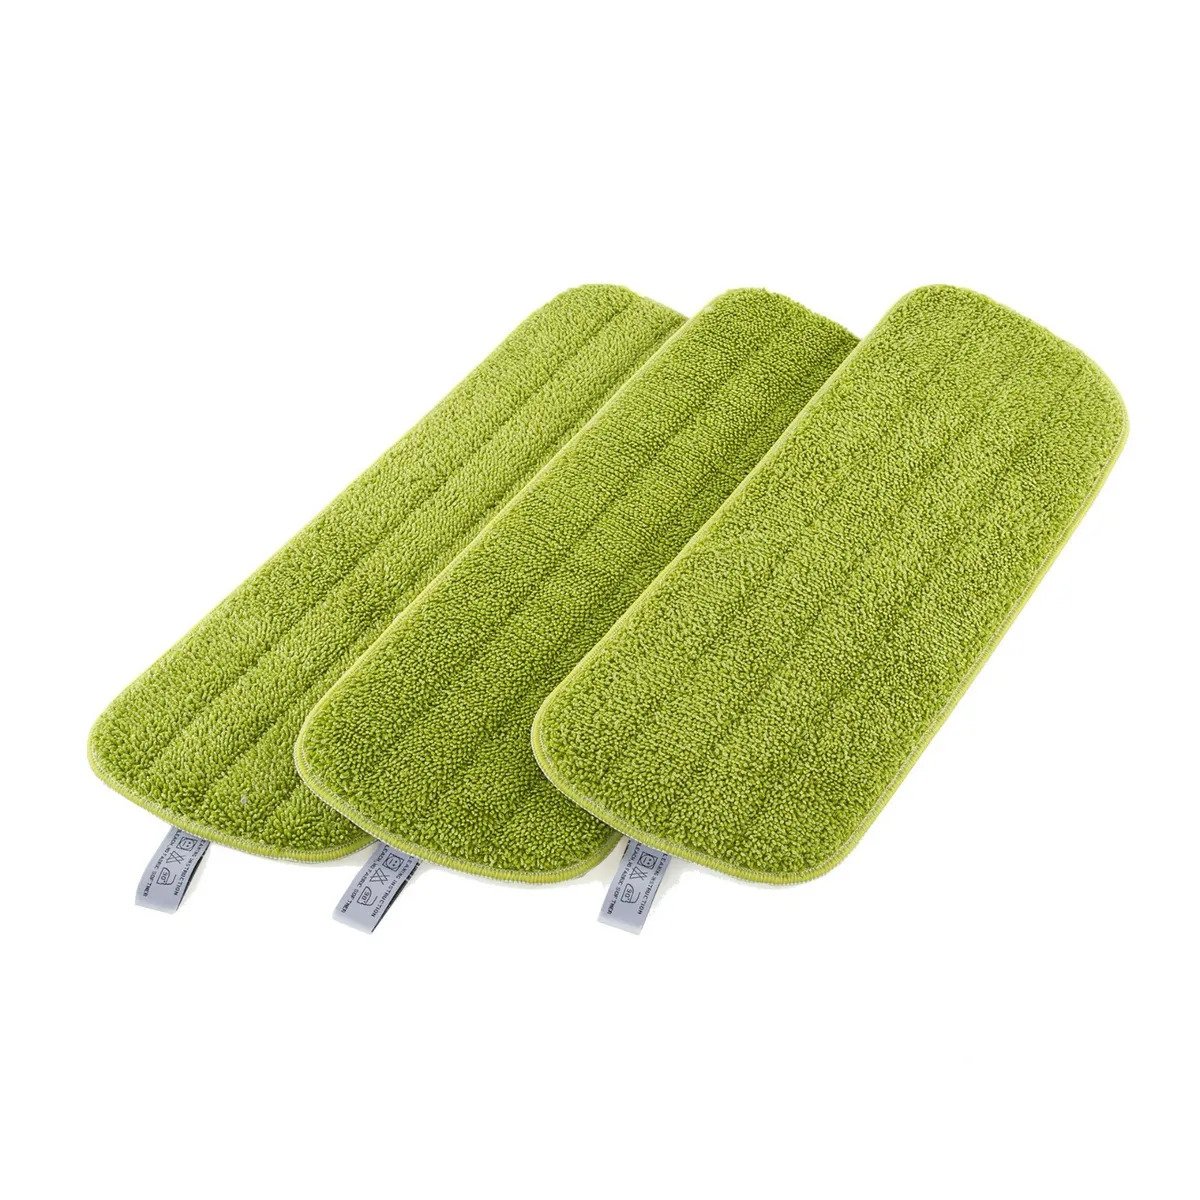 5 Packs Microfiber Mop Pads Spray Mop Refill Replacement Heads Wet/Dry  Floor Cleaning Refill Mop Pads Compatible with Rubbermaid Reveal Spray Mop,Libman,Cxhome,Norwex  and Bona Mops System 